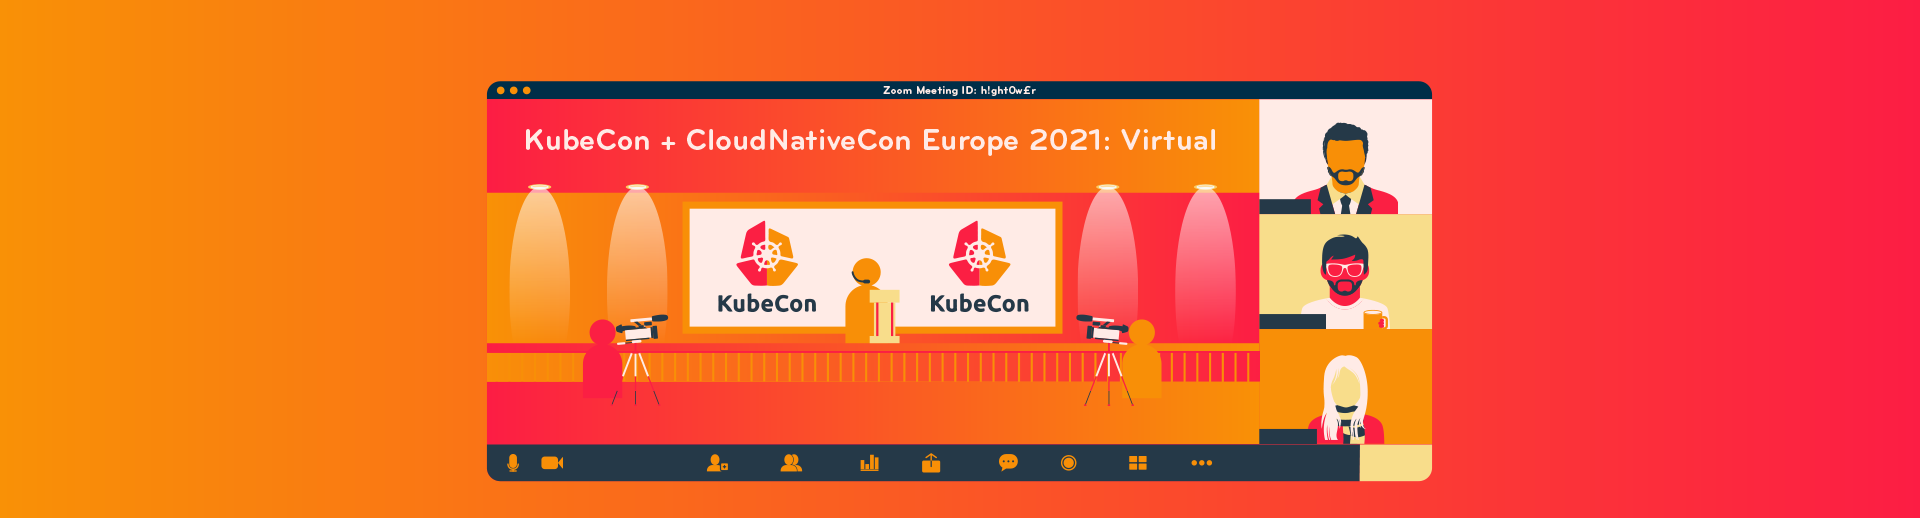 An illustration of a Zoom call where the main screen is showing a Keynote speech at KubeCon